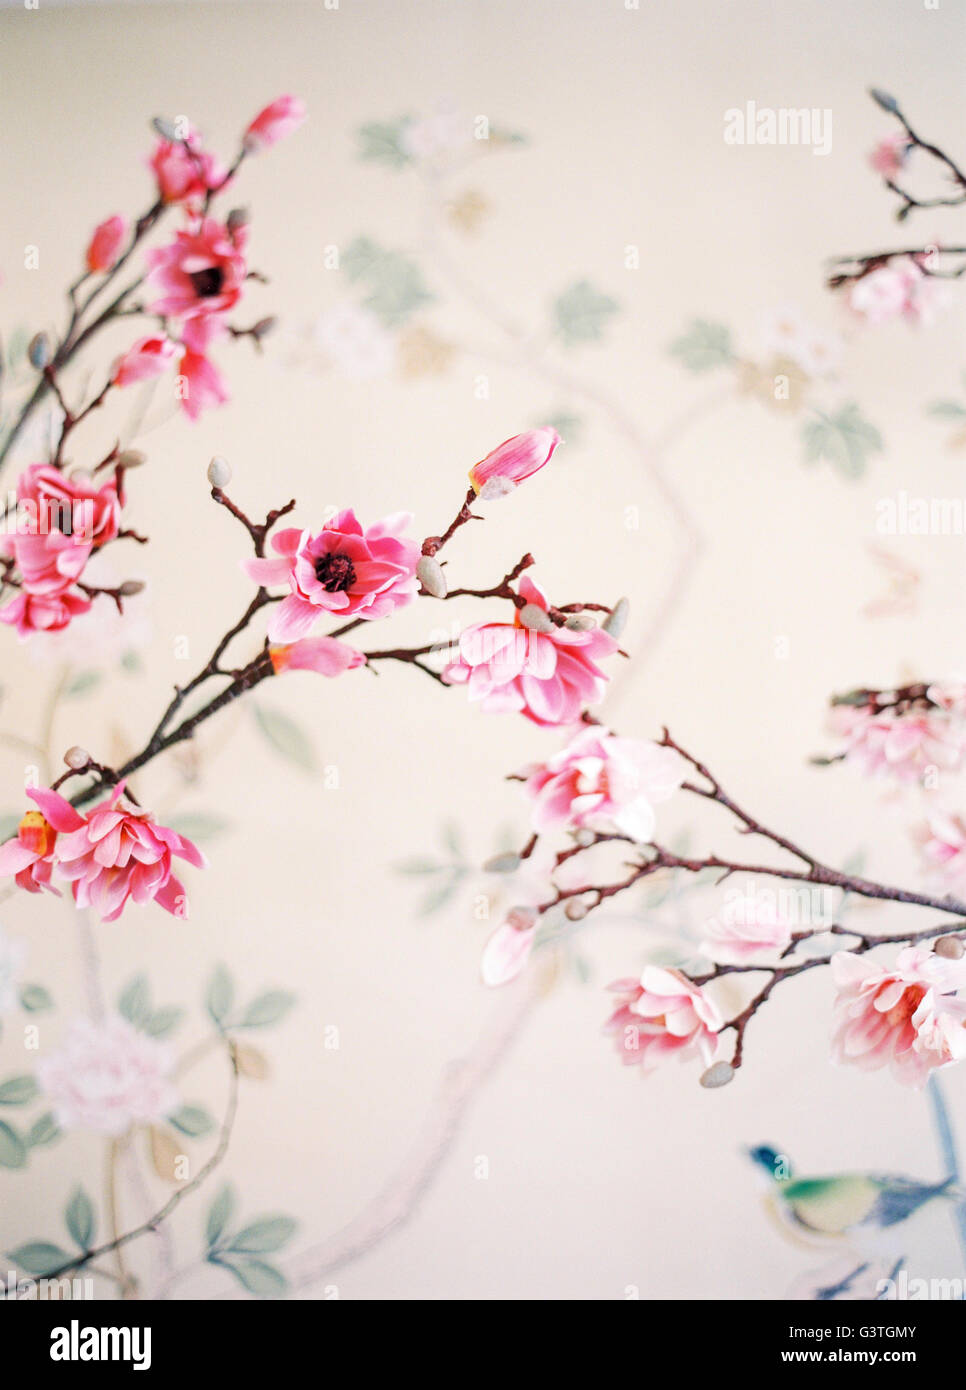 Norway, Painted pink flowers on tree branch Stock Photo